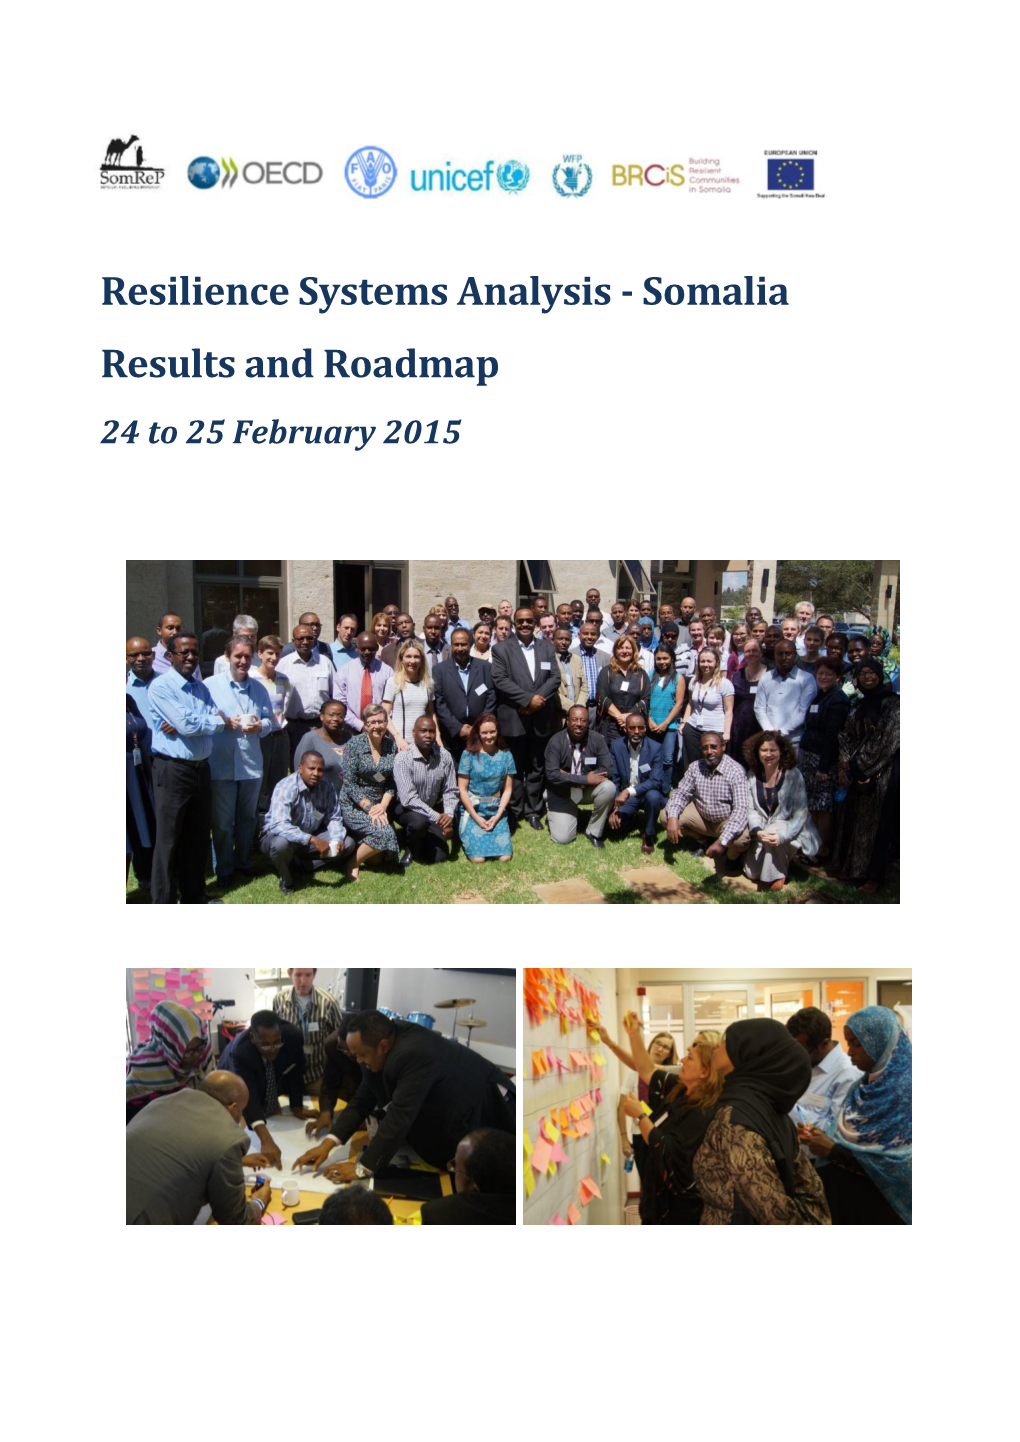 Resilience Systems Analysis - Somalia Results and Roadmap